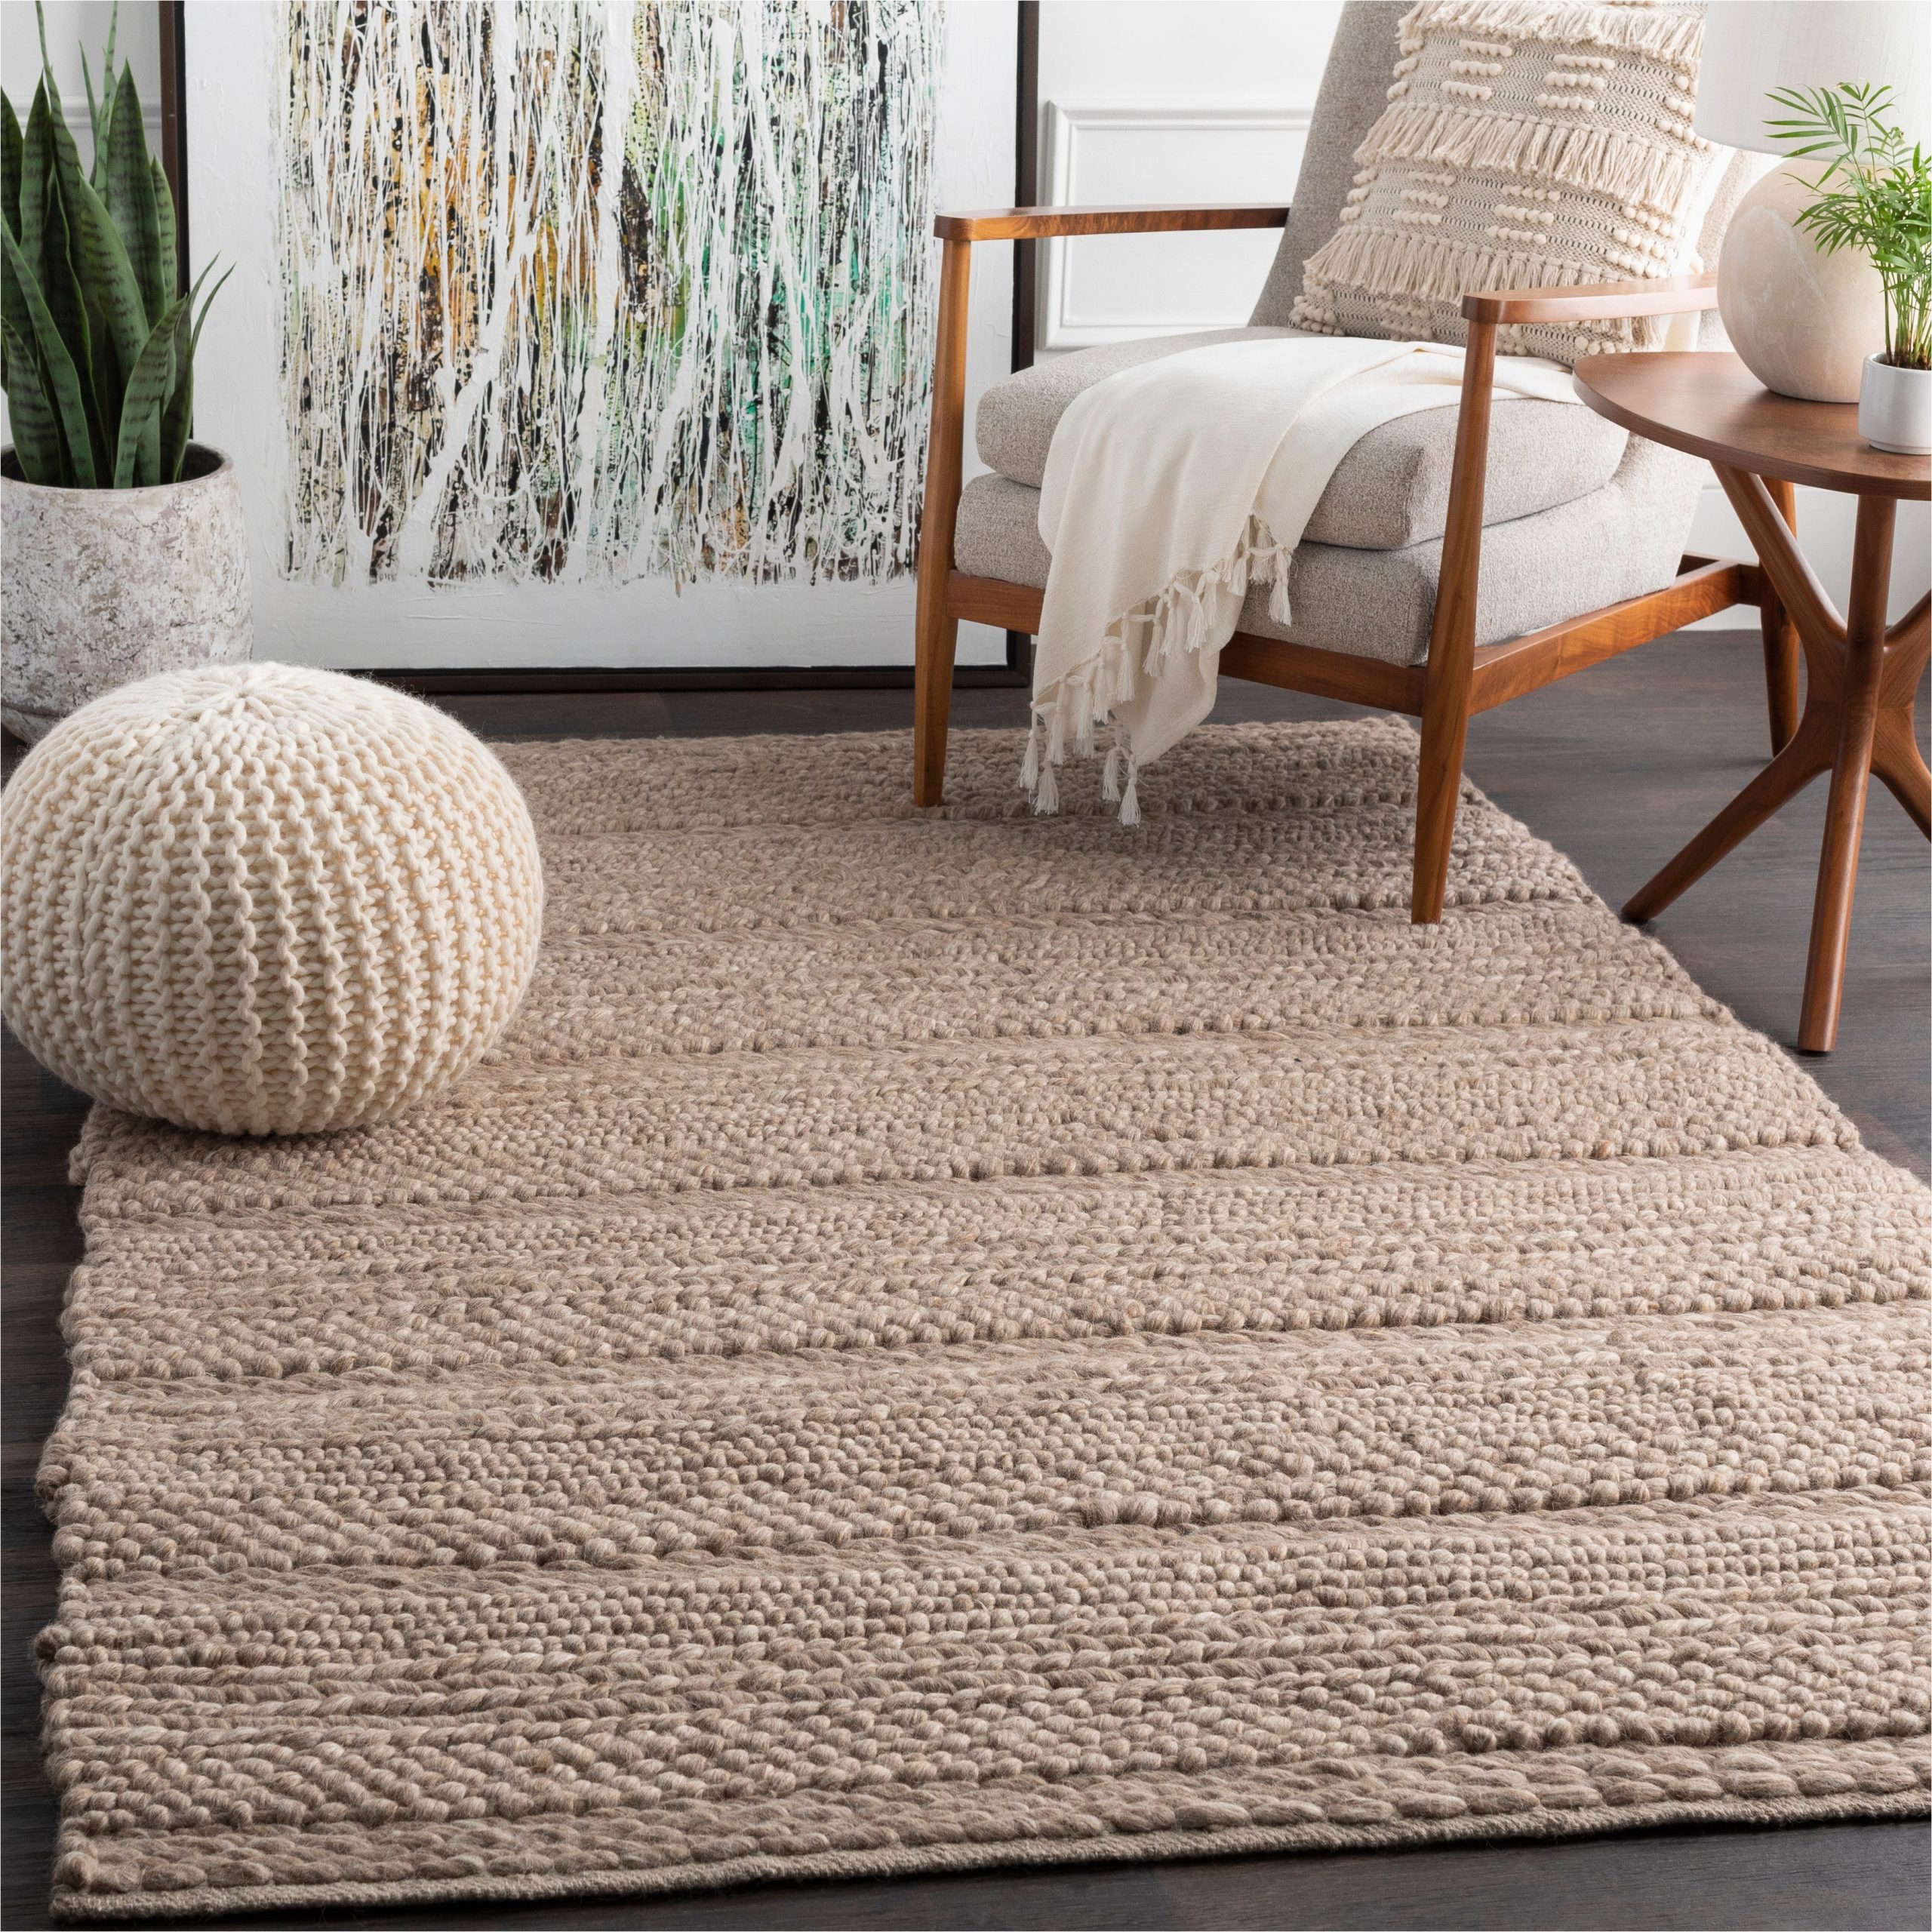 Jocelyn Parchment Handwoven Flatweave Wool White Charcoal area Rug the Gray Barn Hollyhead Wool area Rug – On Sale – Overstock – 6608221